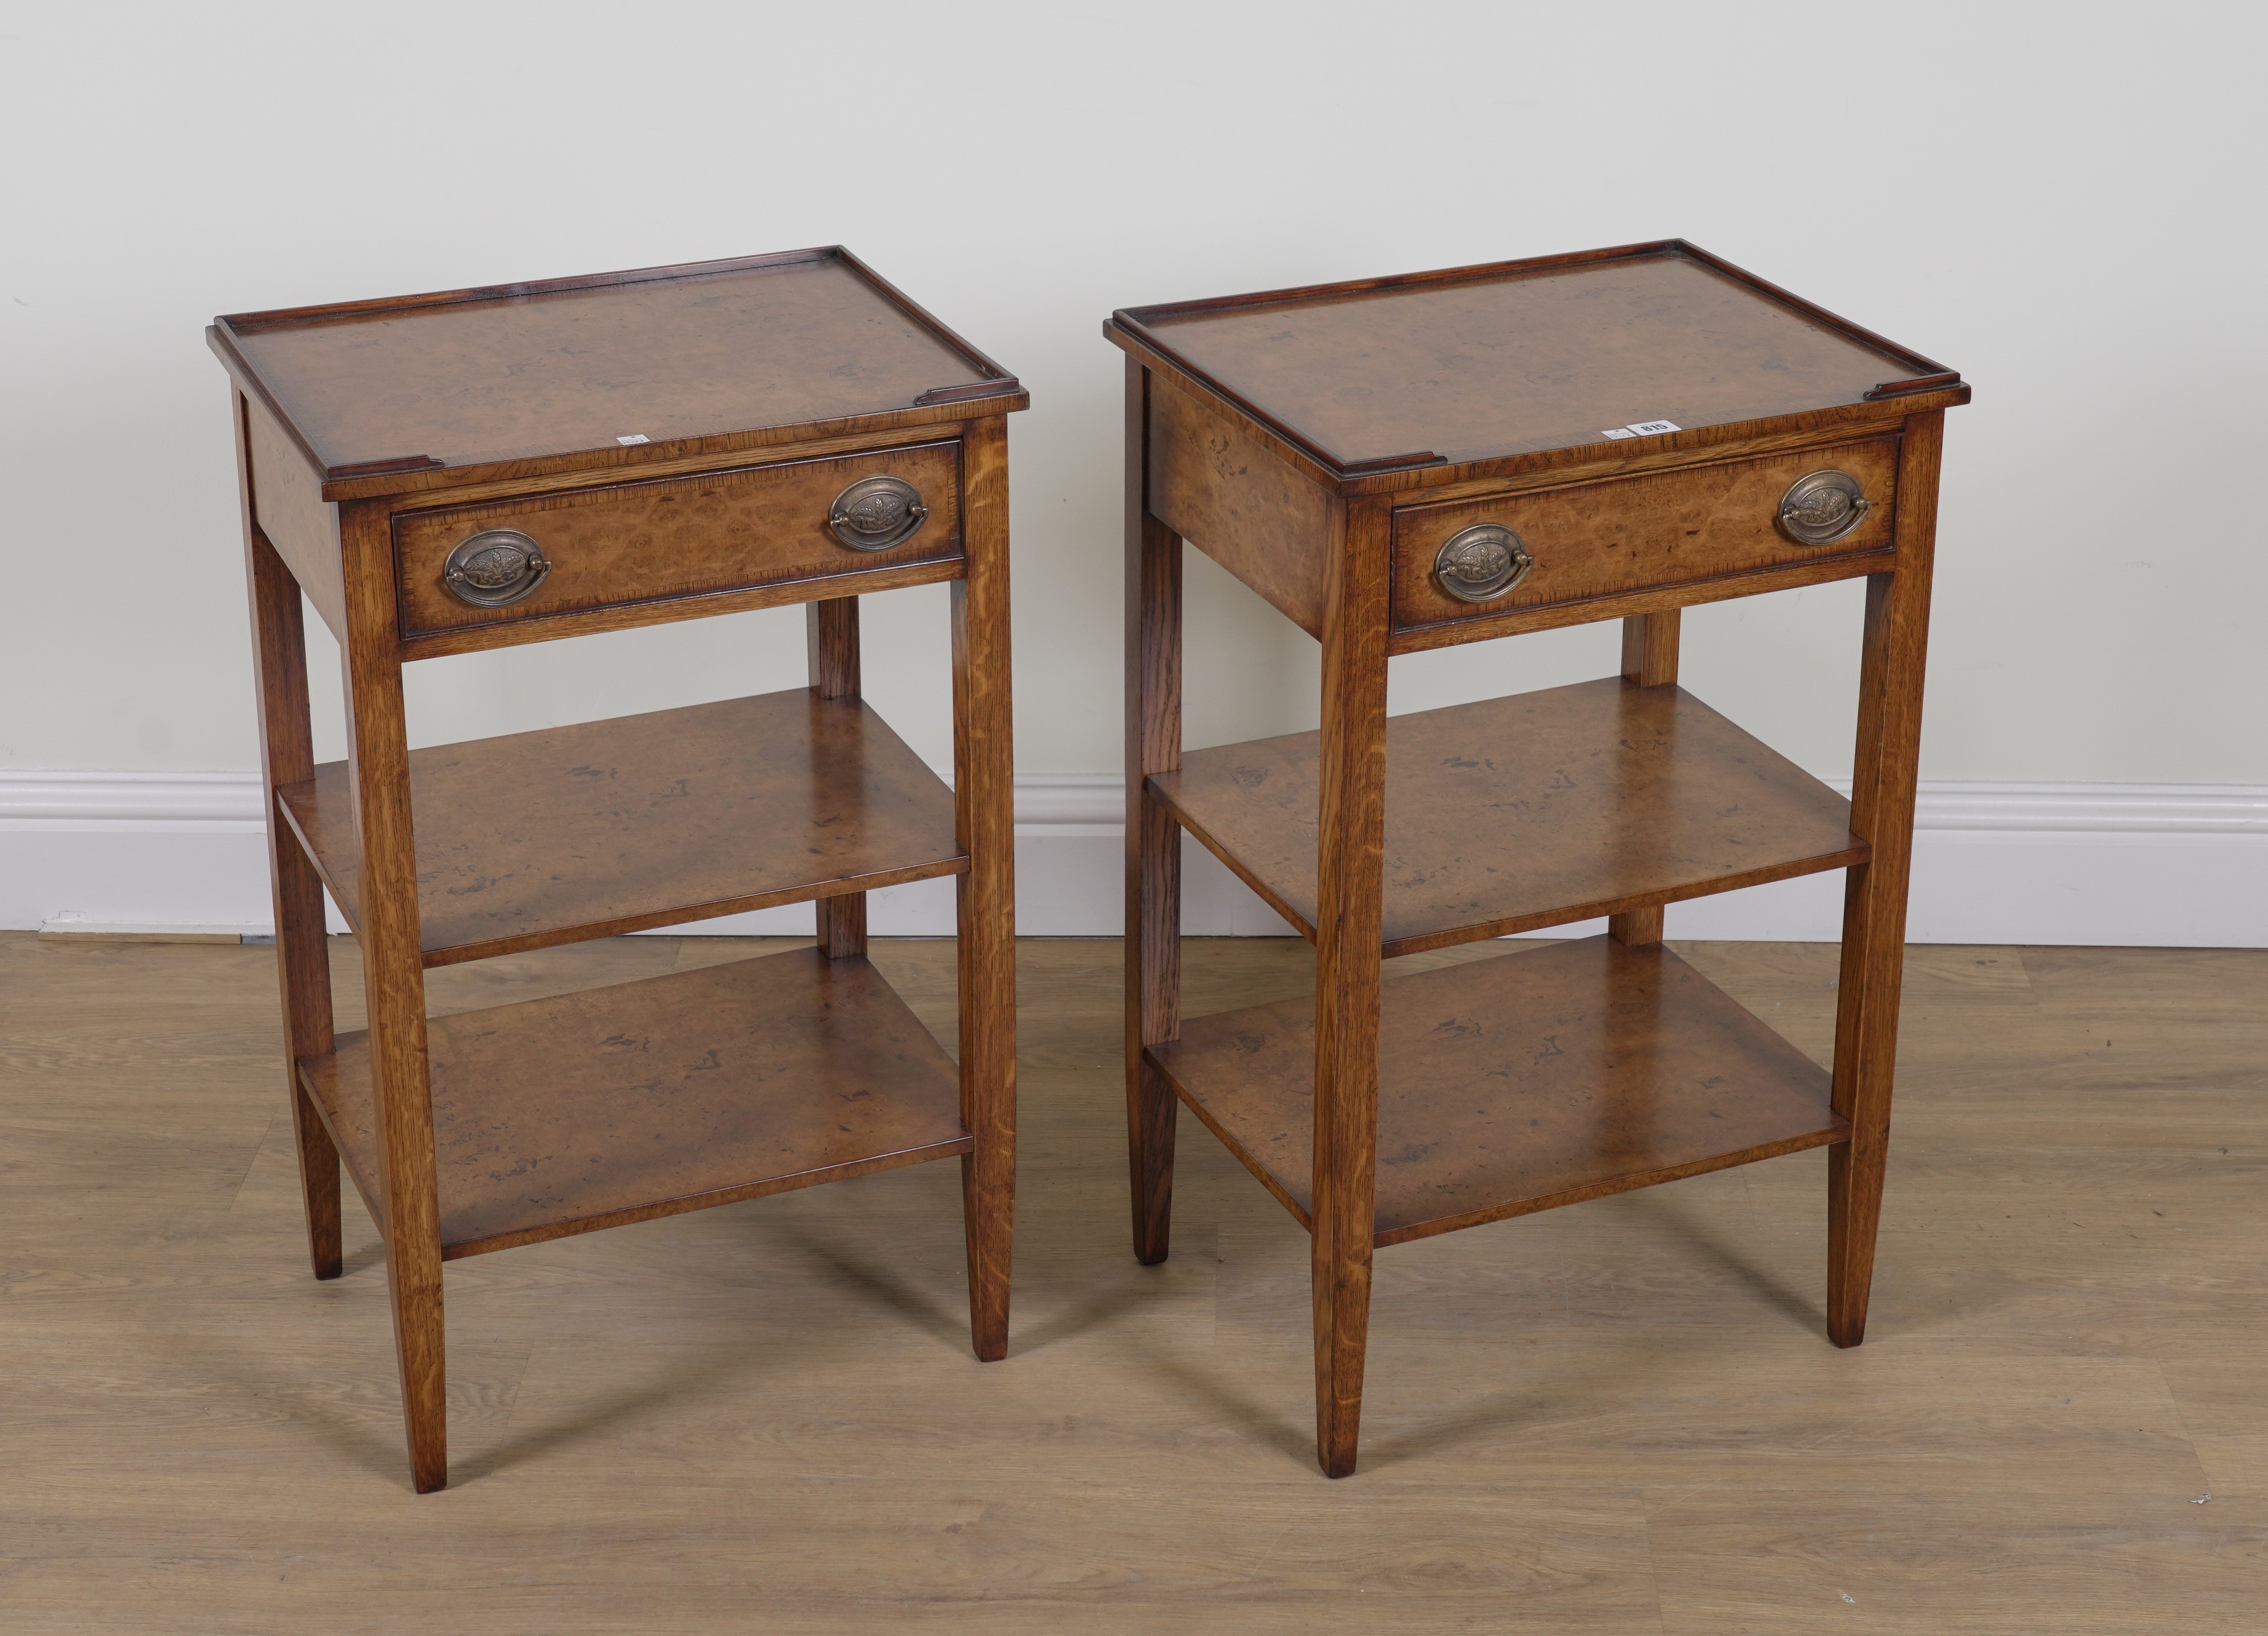 A PAIR OF FIGURED WALNUT SINGLE DRAWER THREE TIER RECTANGULAR SIDE TABLES (2) - Image 2 of 4